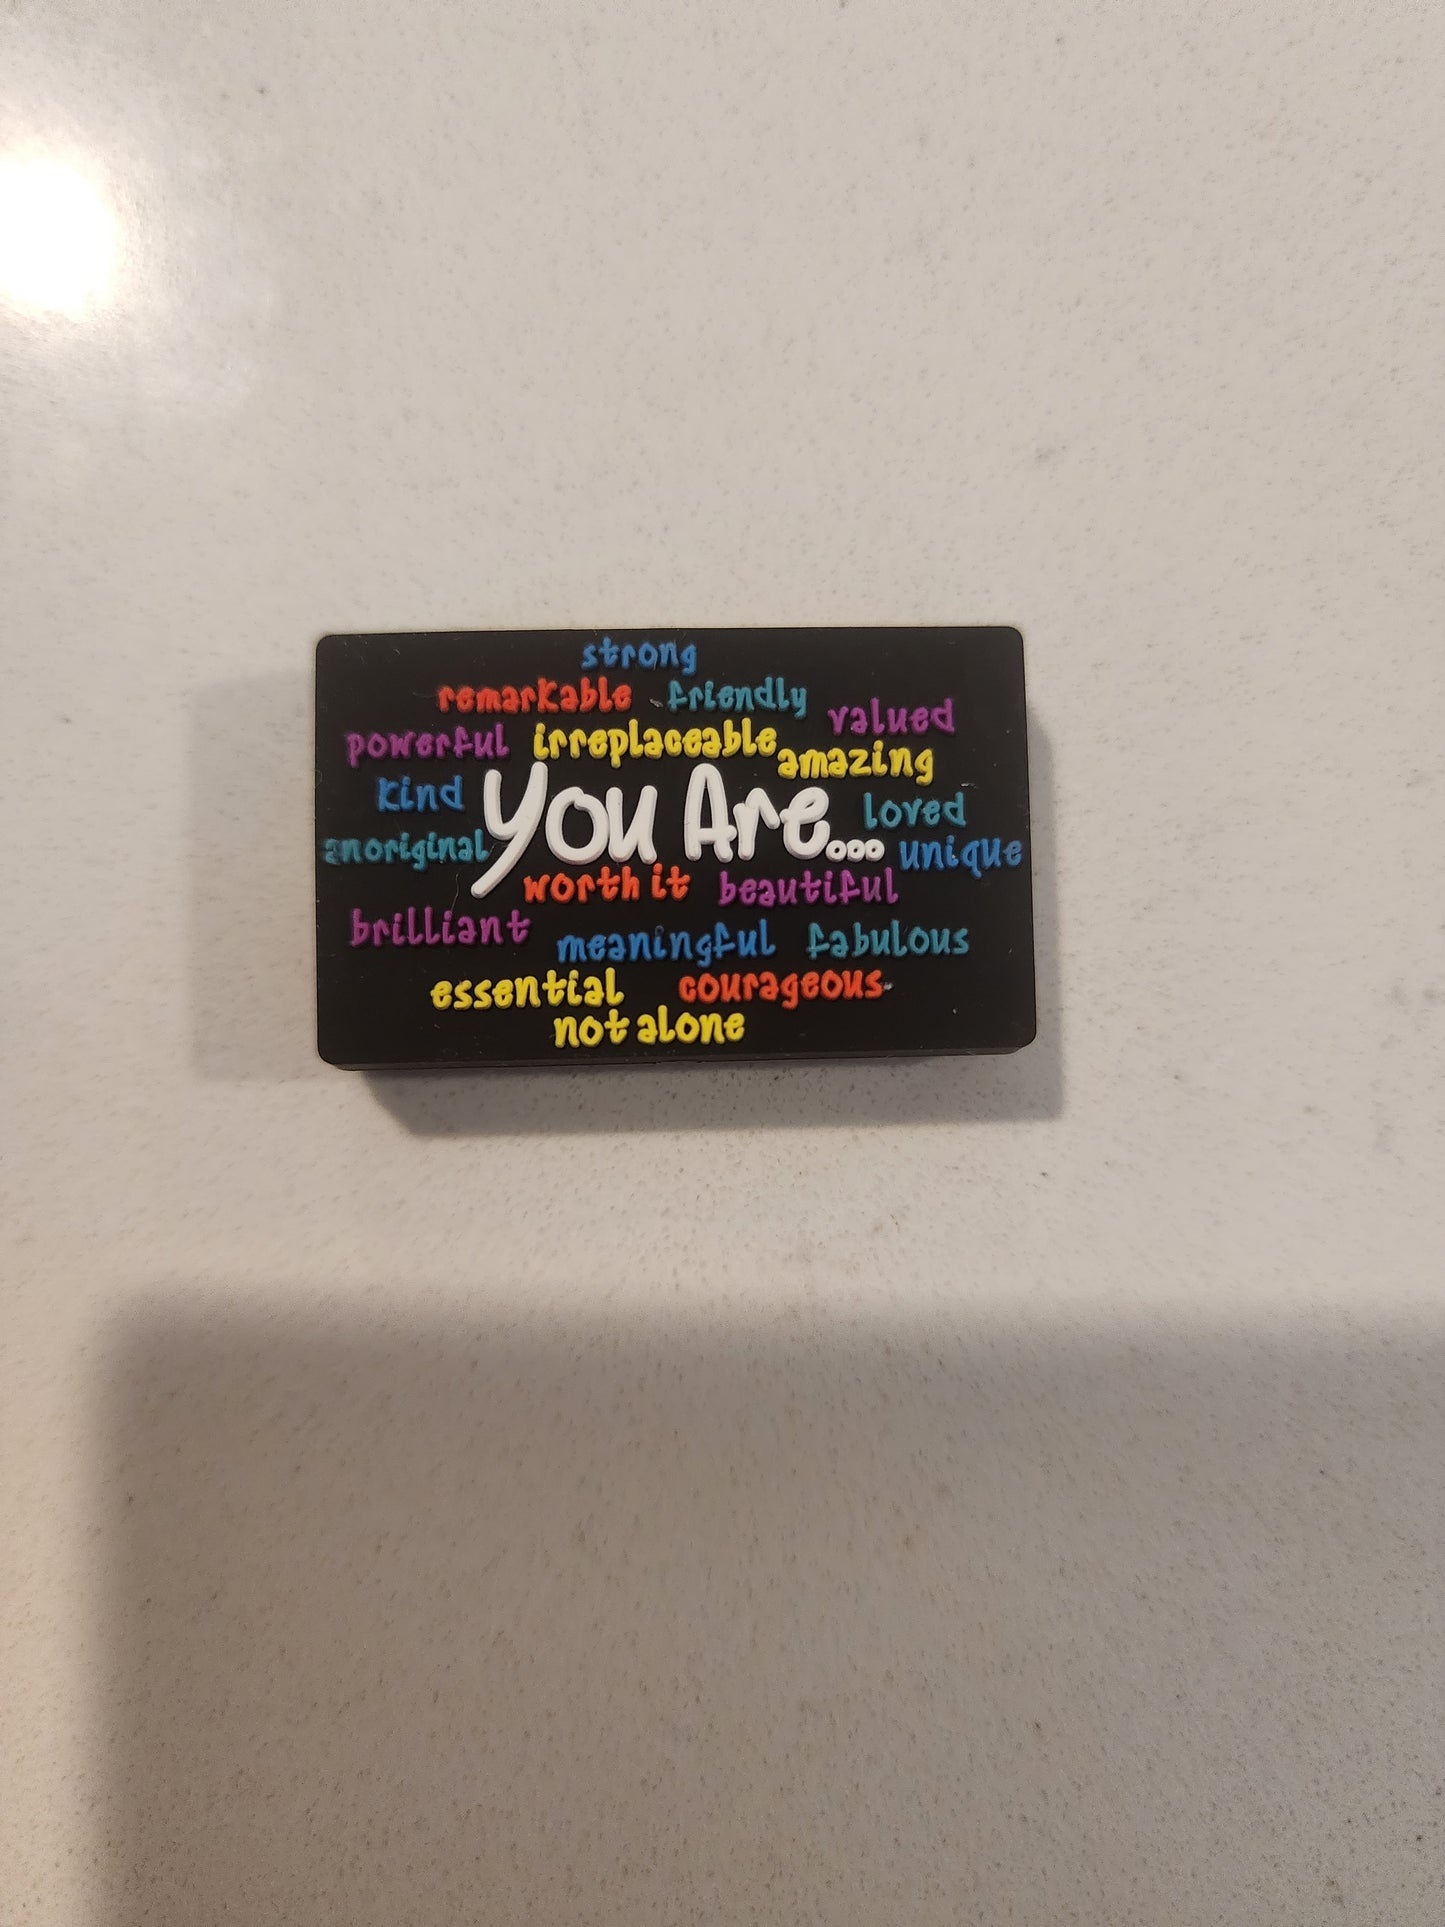 You are mental health inspirational silicone focal bead CUSTOM designed by Amanda